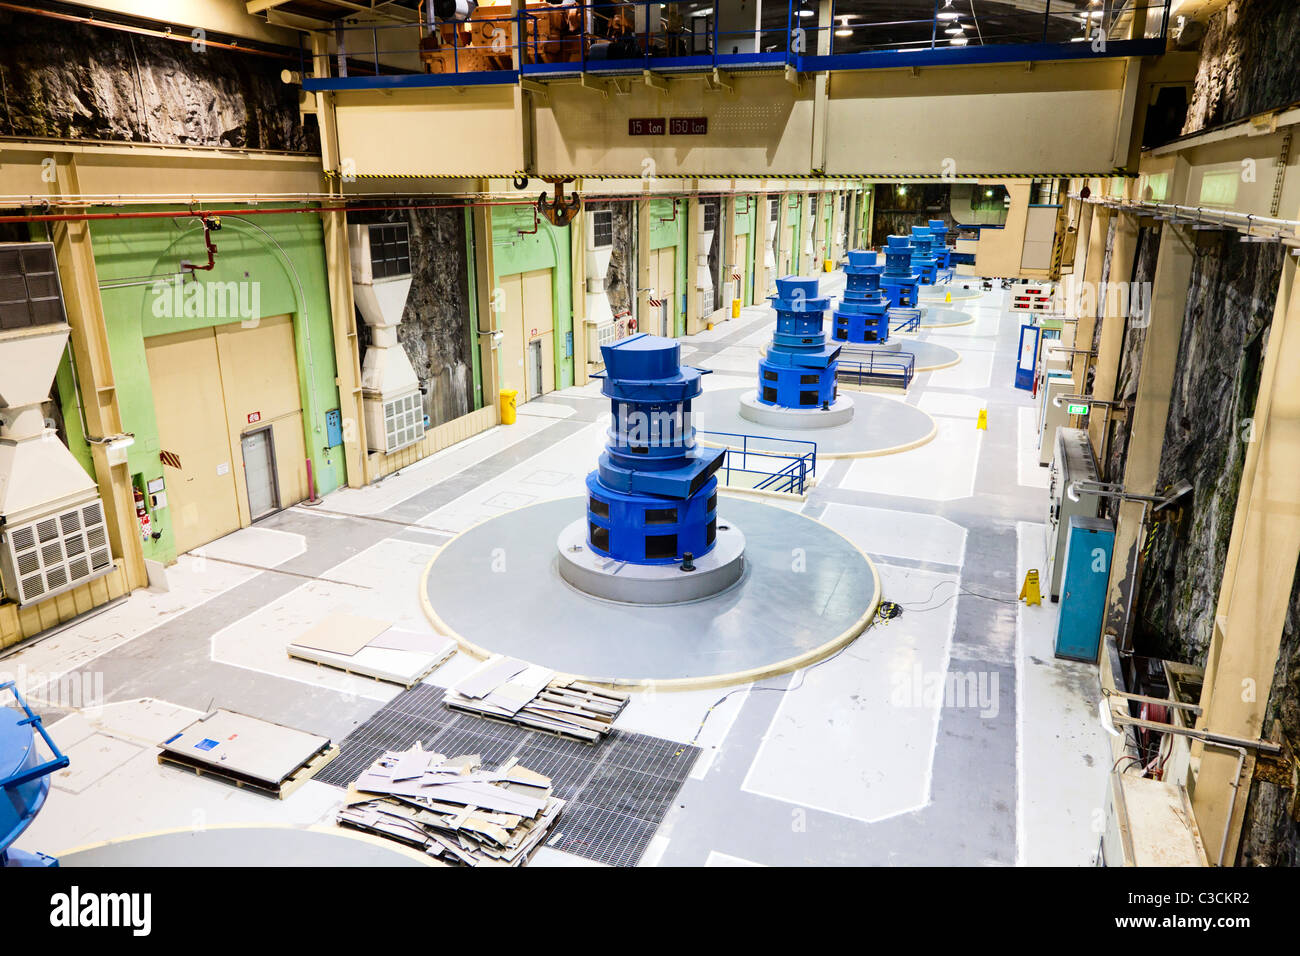 Turbine room of hydroelectric power station Stock Photo